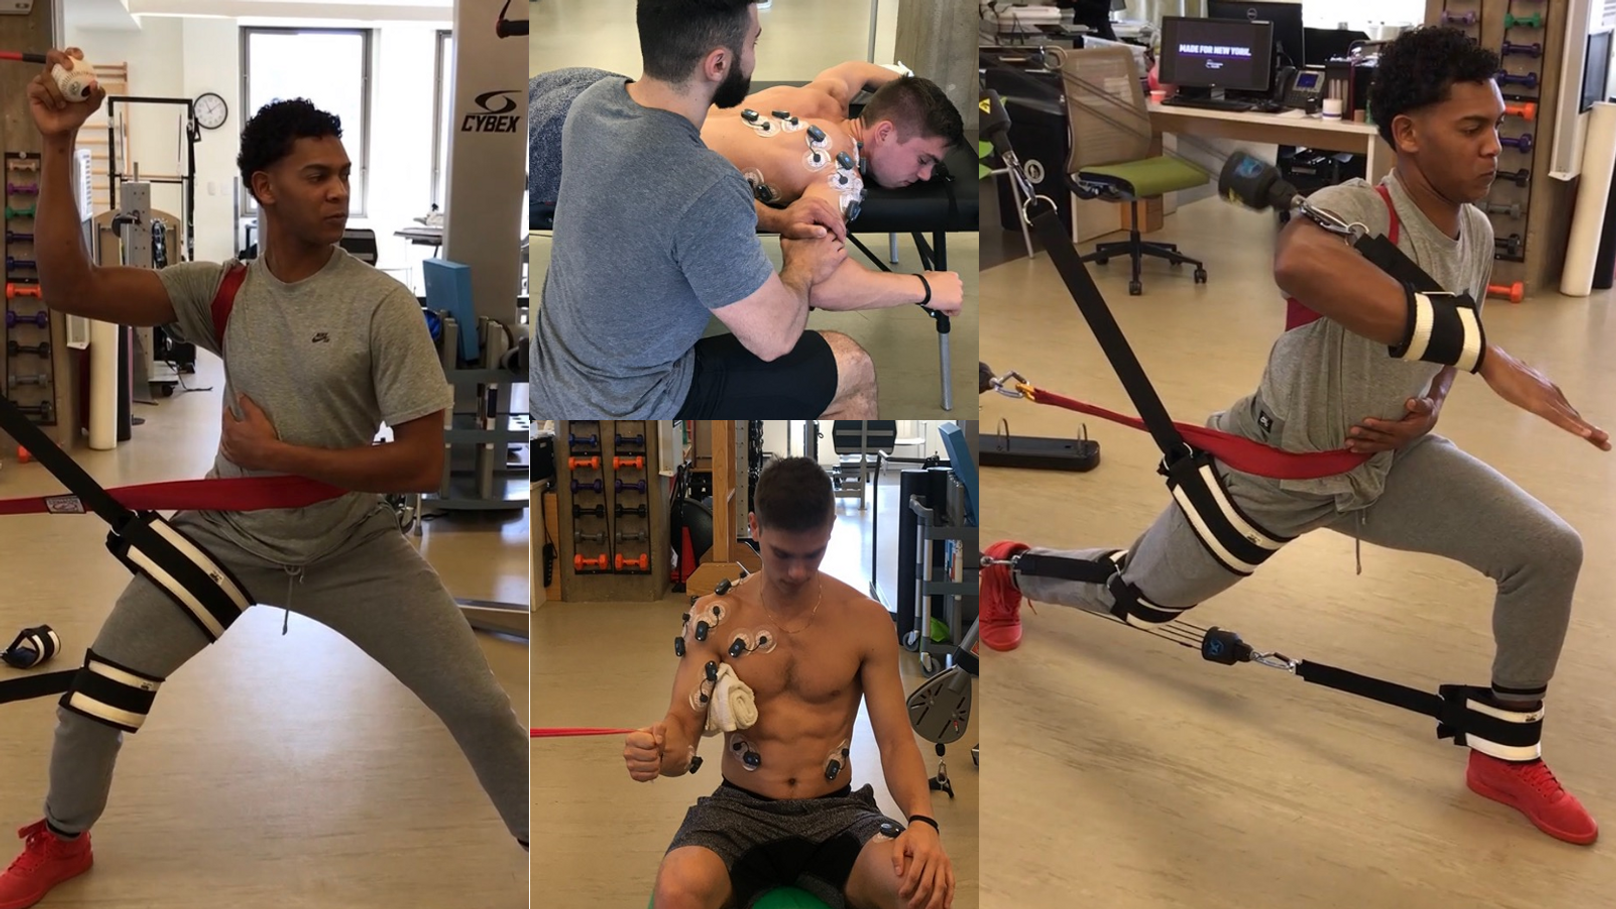 Rehabilitation of the Overhead Athlete: An Evidence Based Approach to Return to Sports